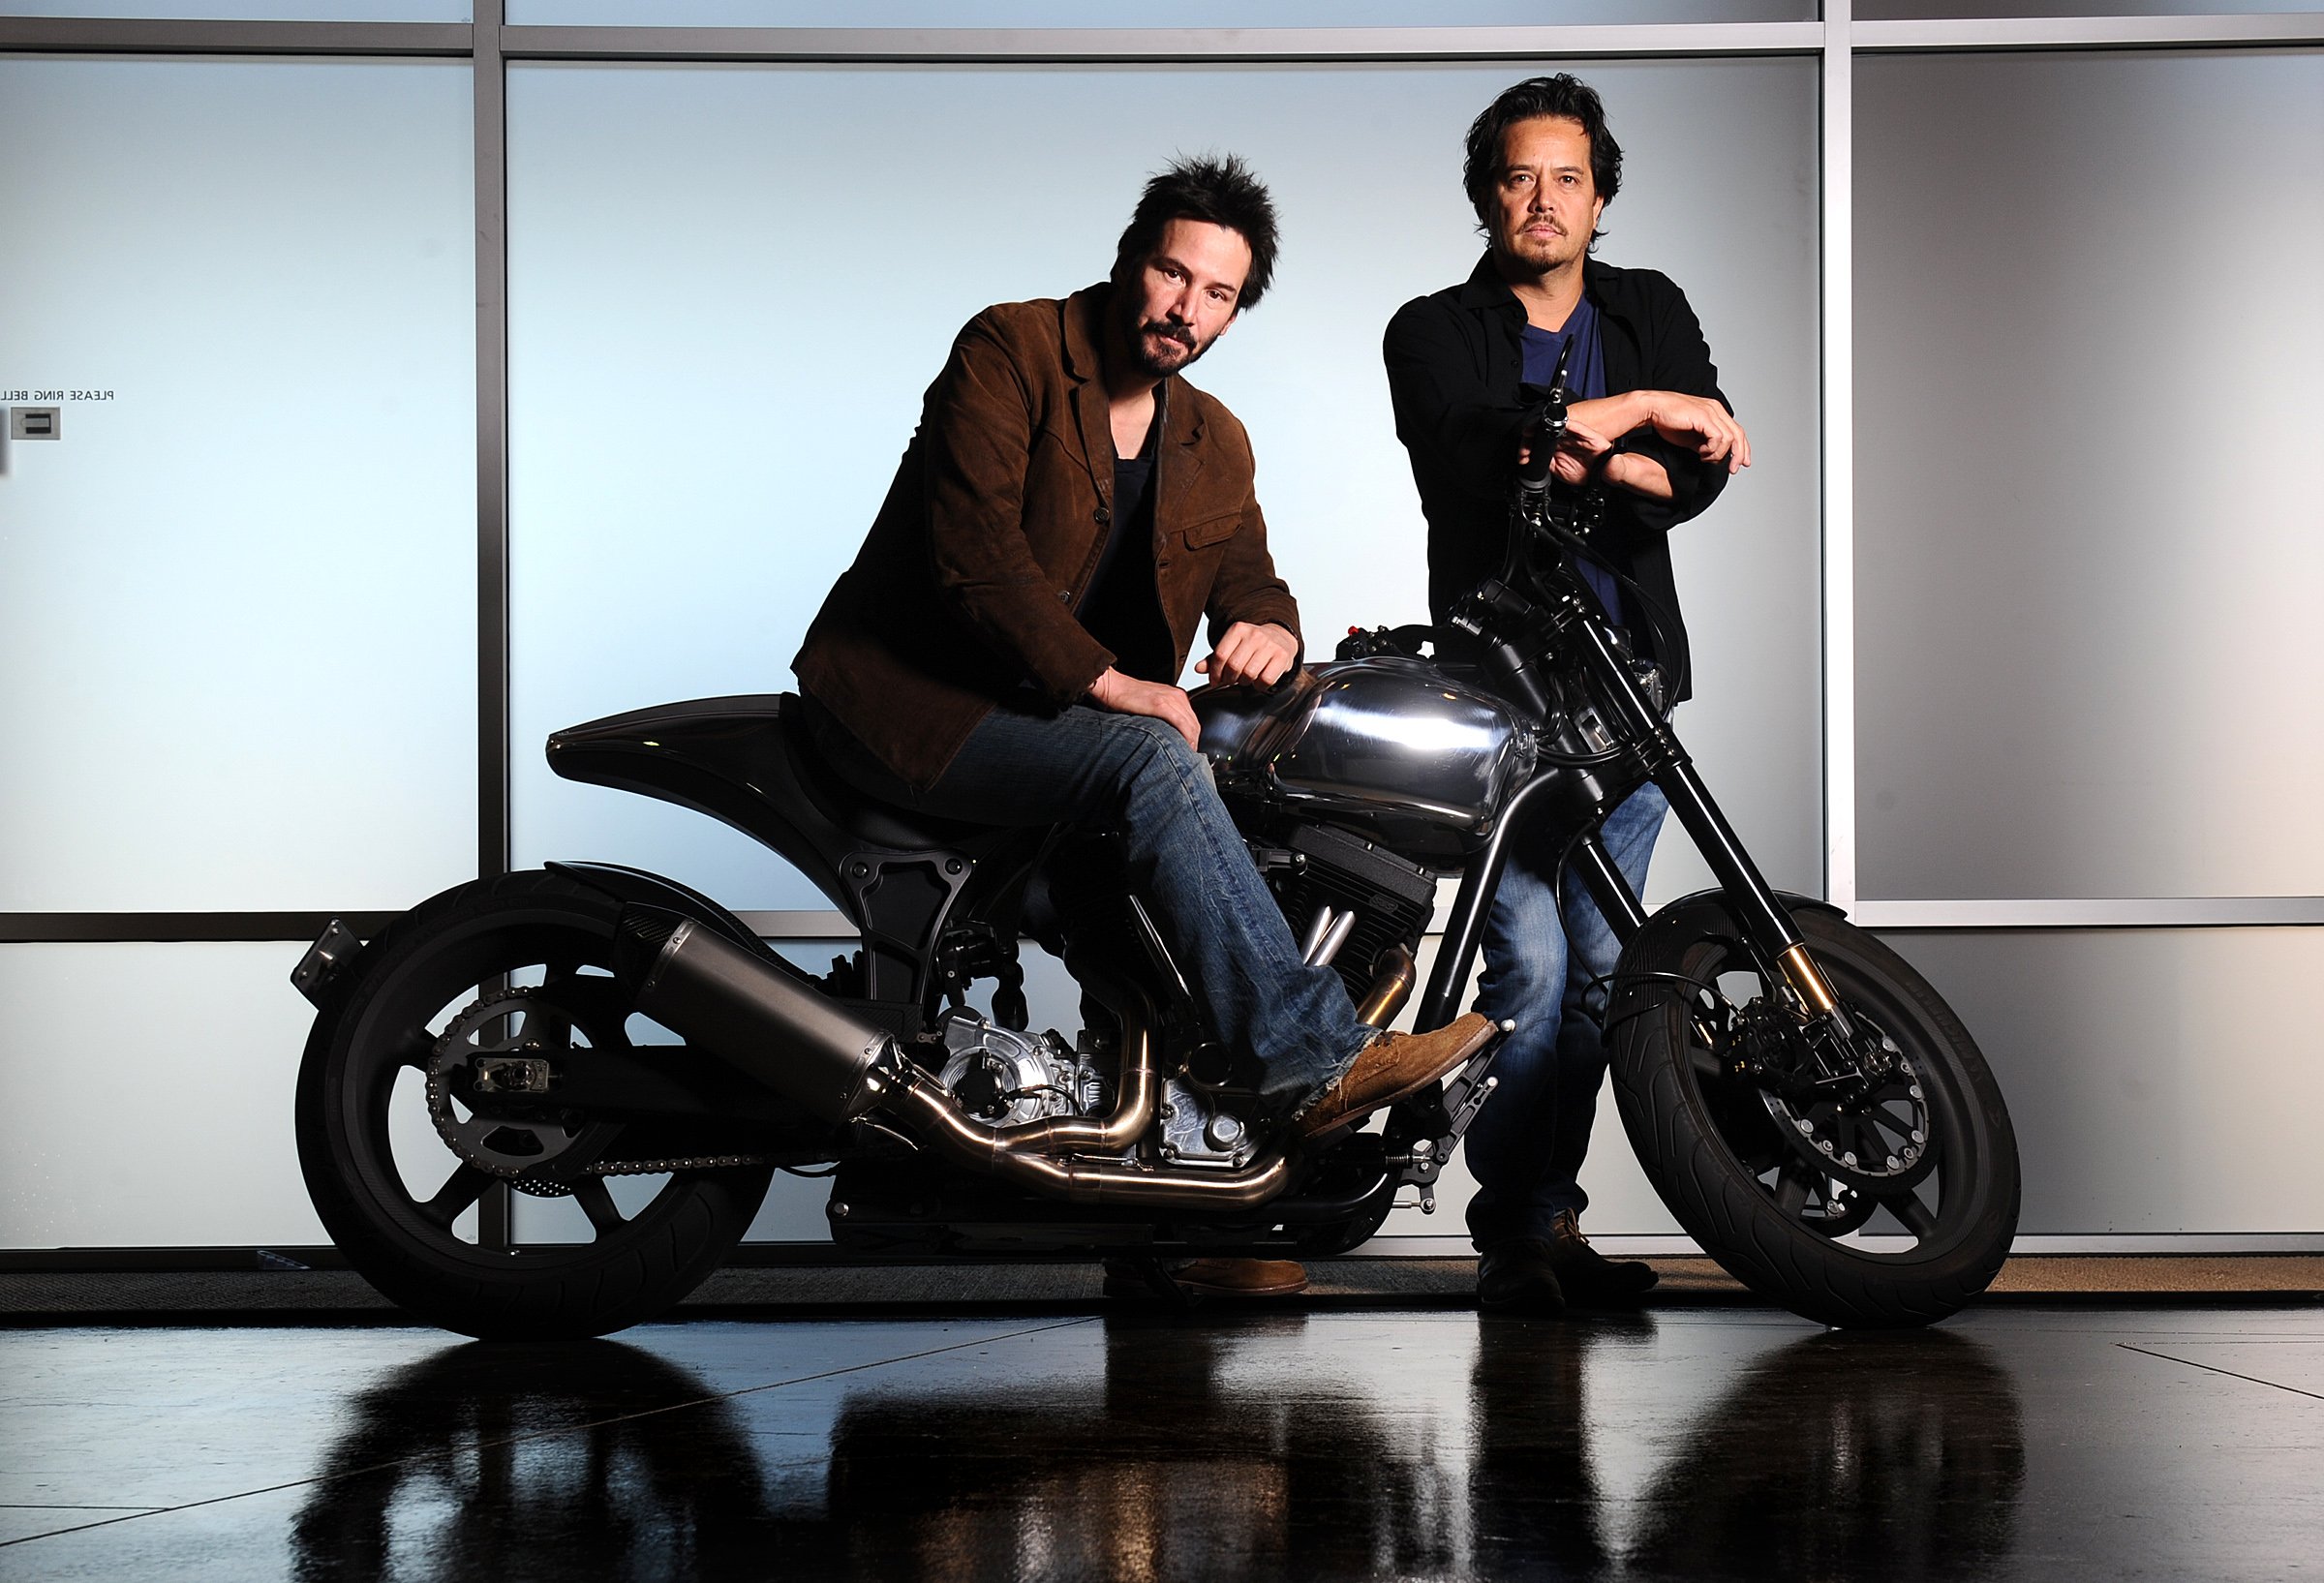 Arch Motorcycle Company founders Keanu Reeves and Gard Hollinger pose with a bike